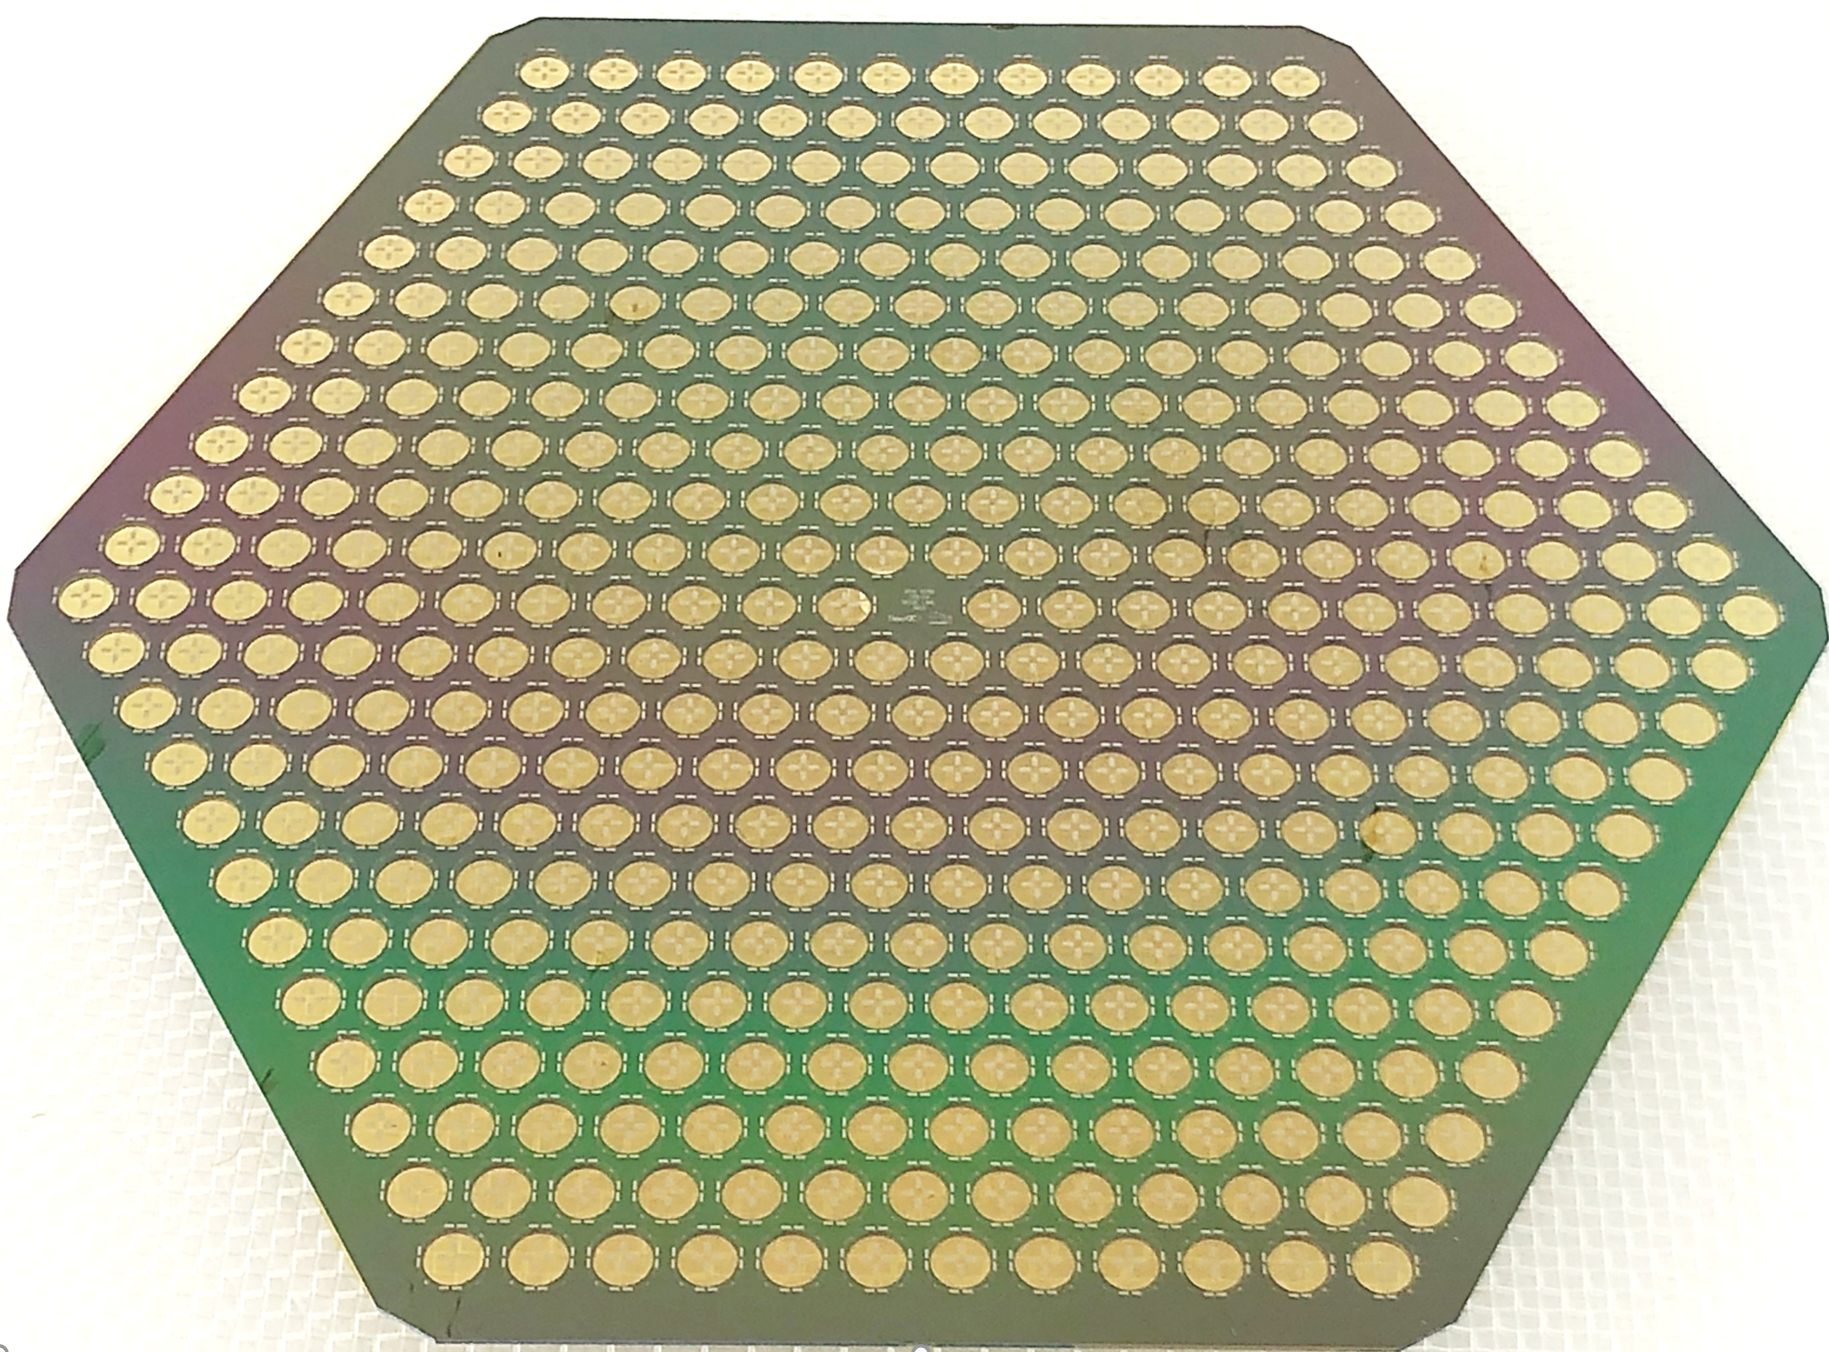 Image - A prototype wafer, measuring about 5 inches across, with over 1,000 detectors. (Photo courtesy of Aritoki Suzuki/Berkeley Lab)